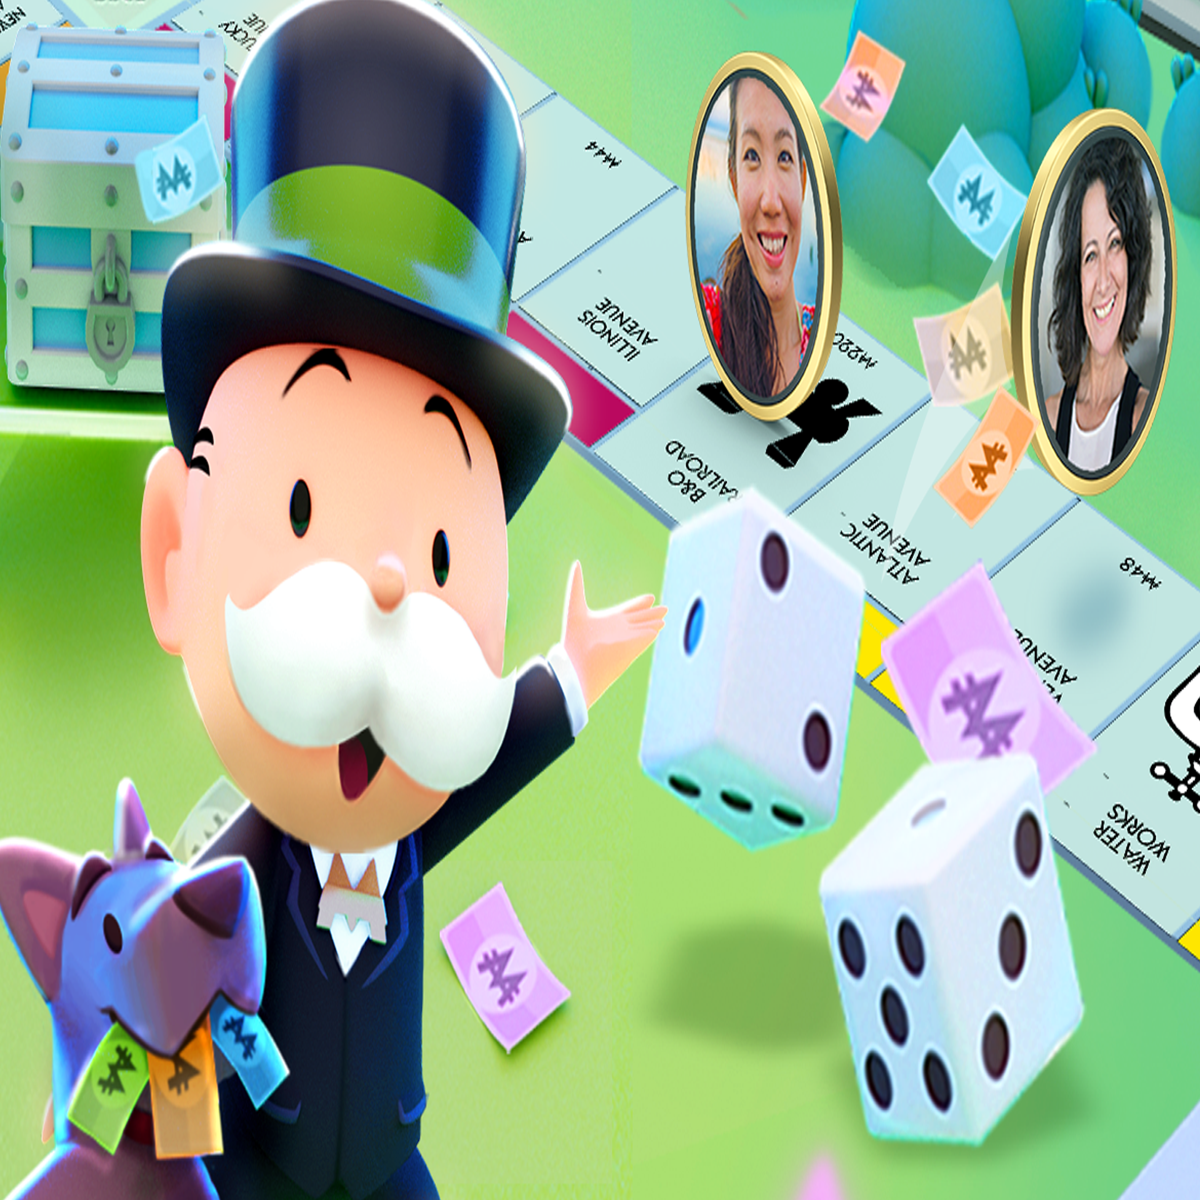 Monopoly Go! is a “highly social mobile game based on the family classic